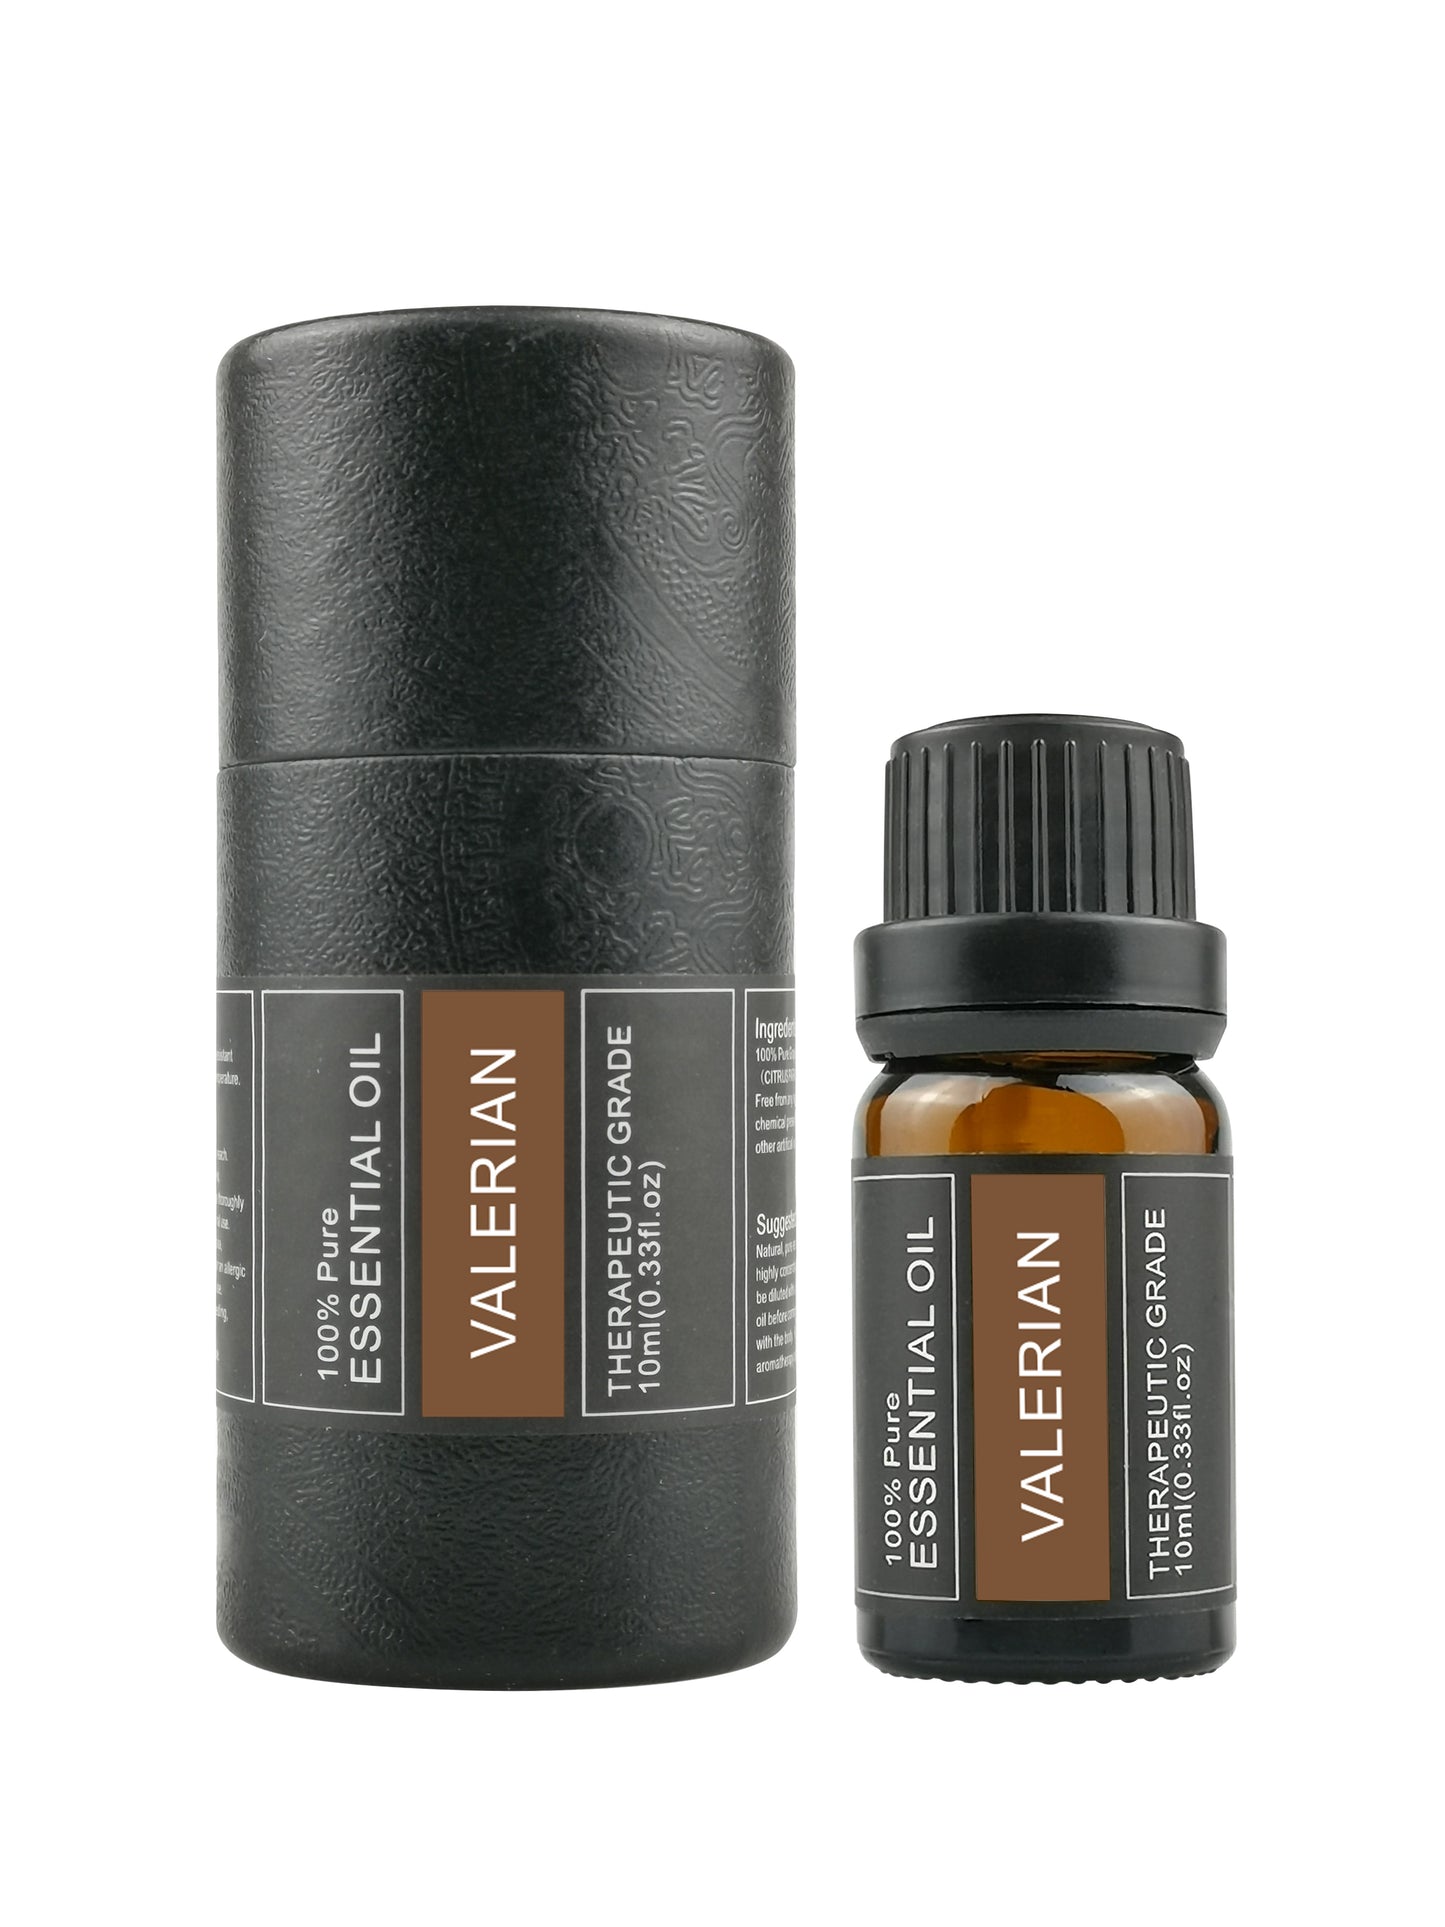 OEM & ODM Customized Valerian Aromatherapy Essential Oil, Wholesale Natural Essential Oil 255